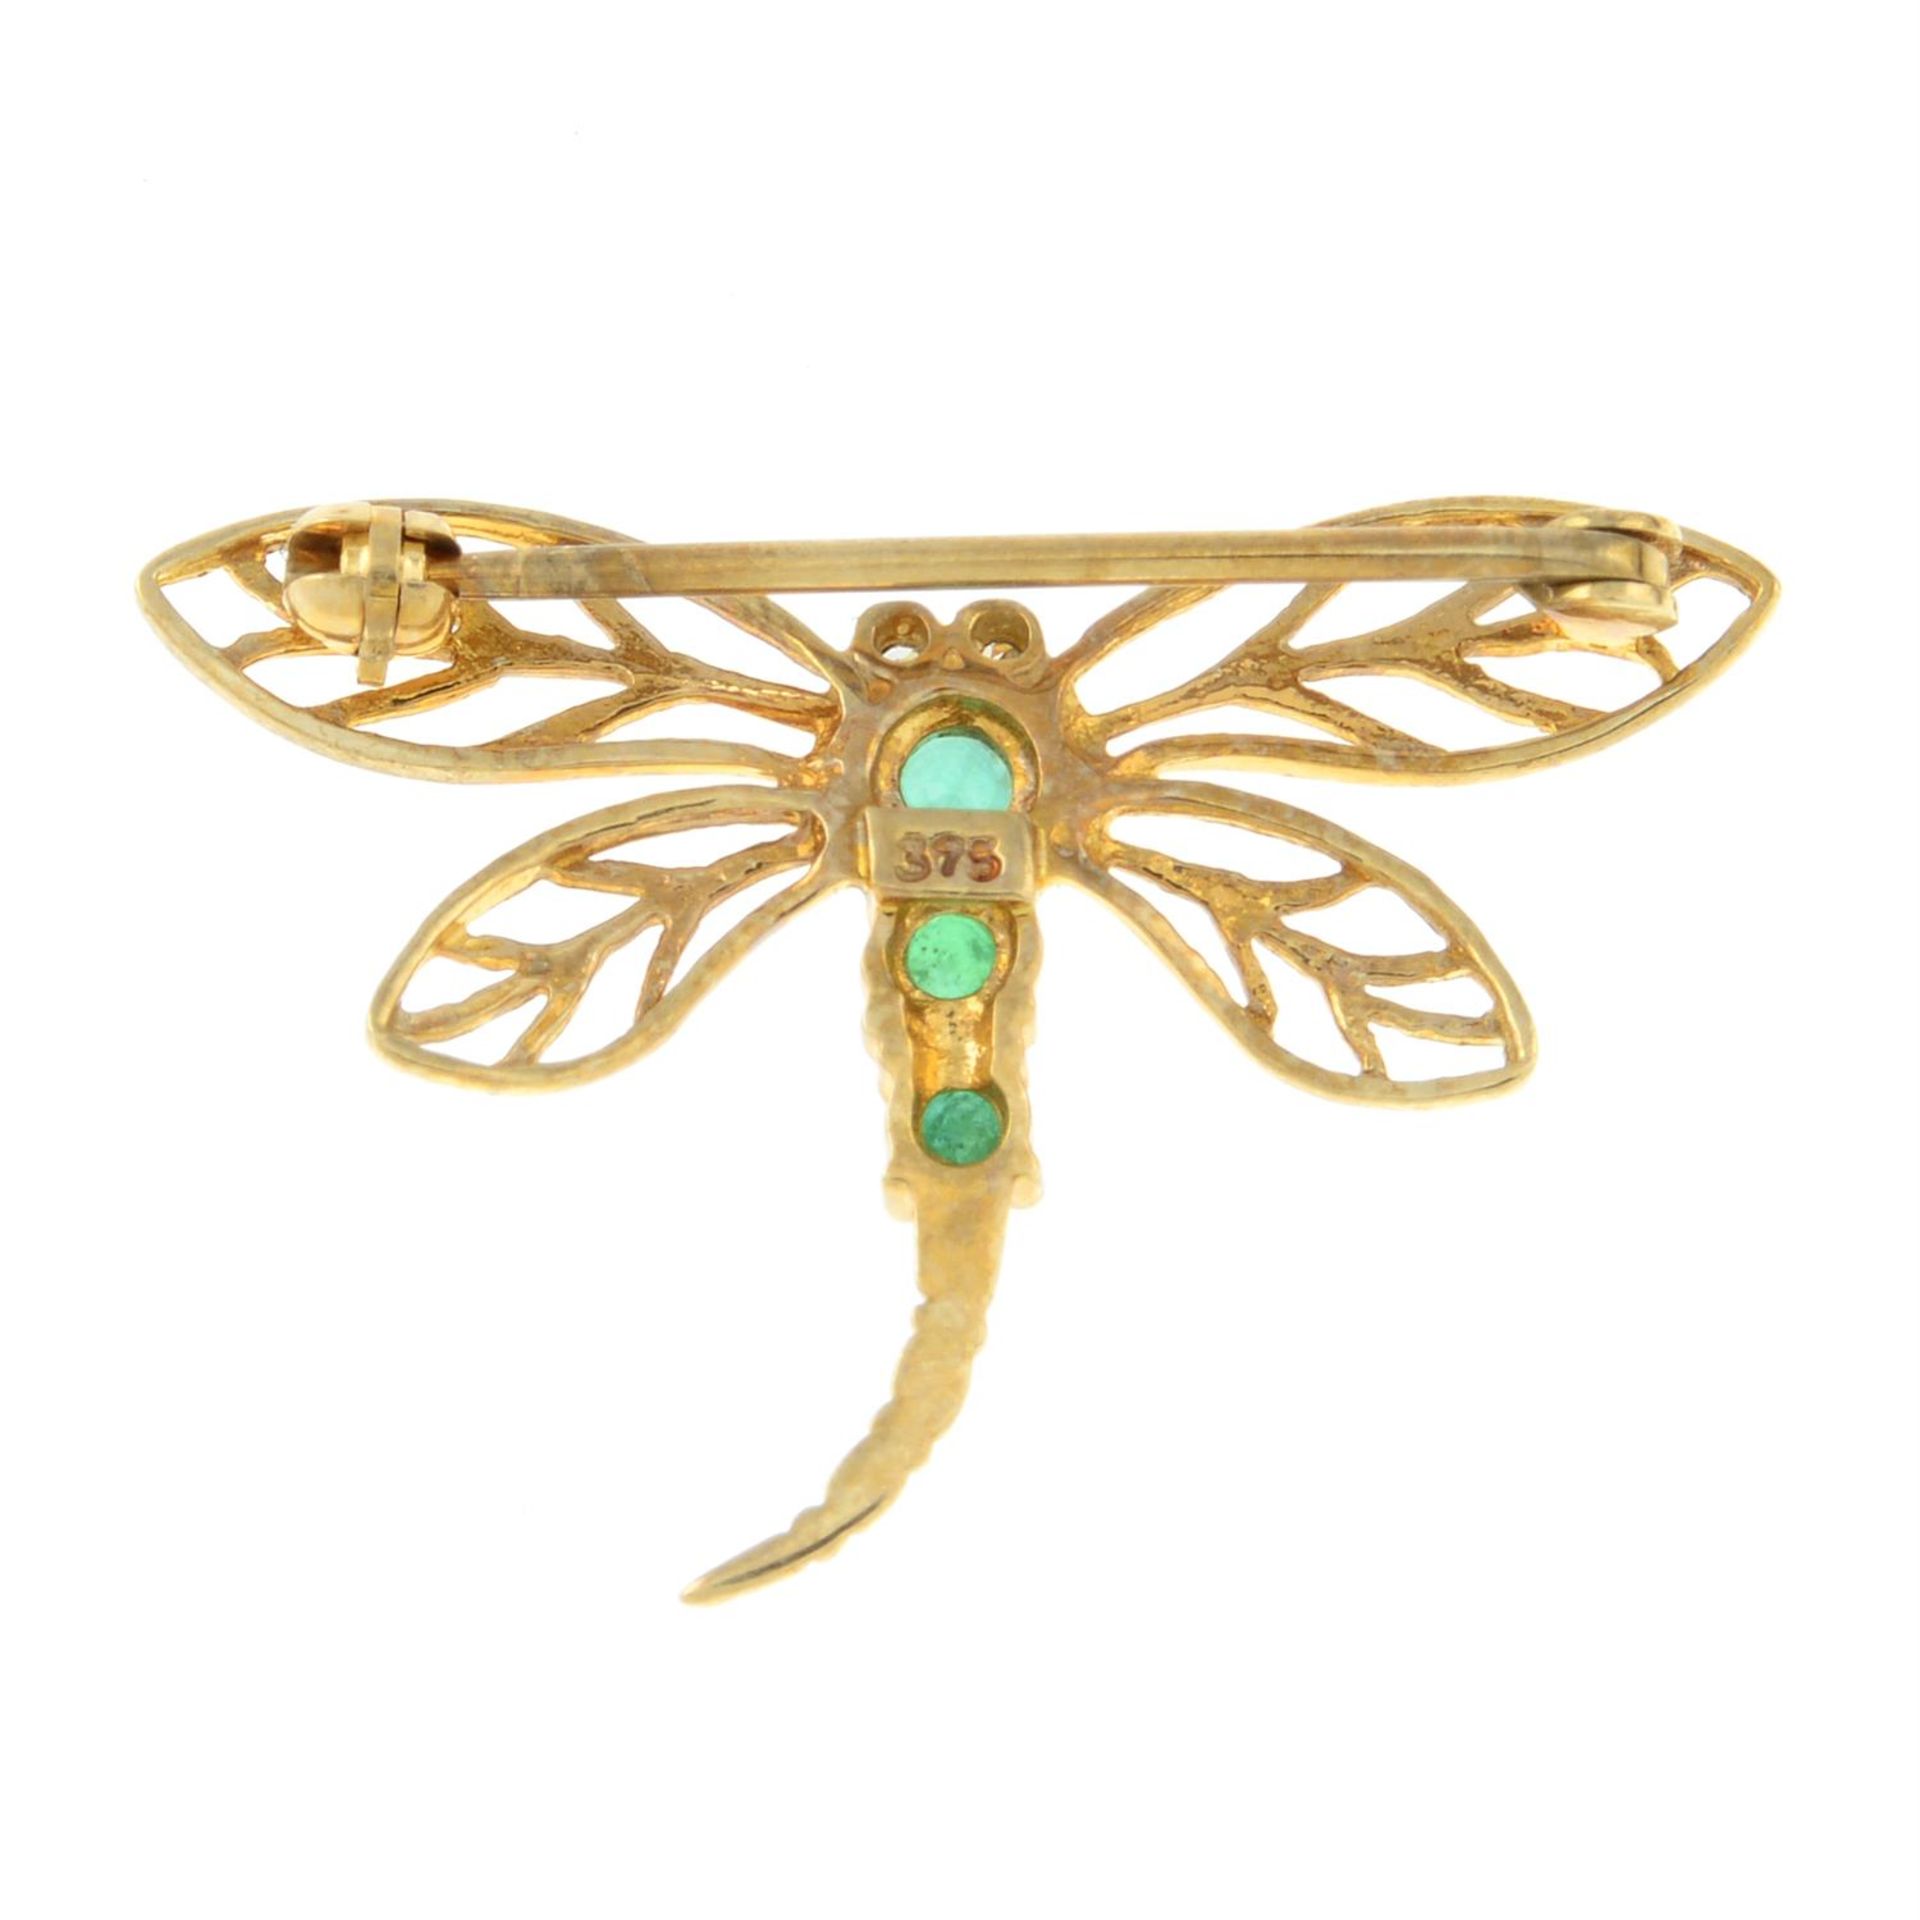 An emerald and diamond dragonfly brooch, with openwork wings. - Image 2 of 2